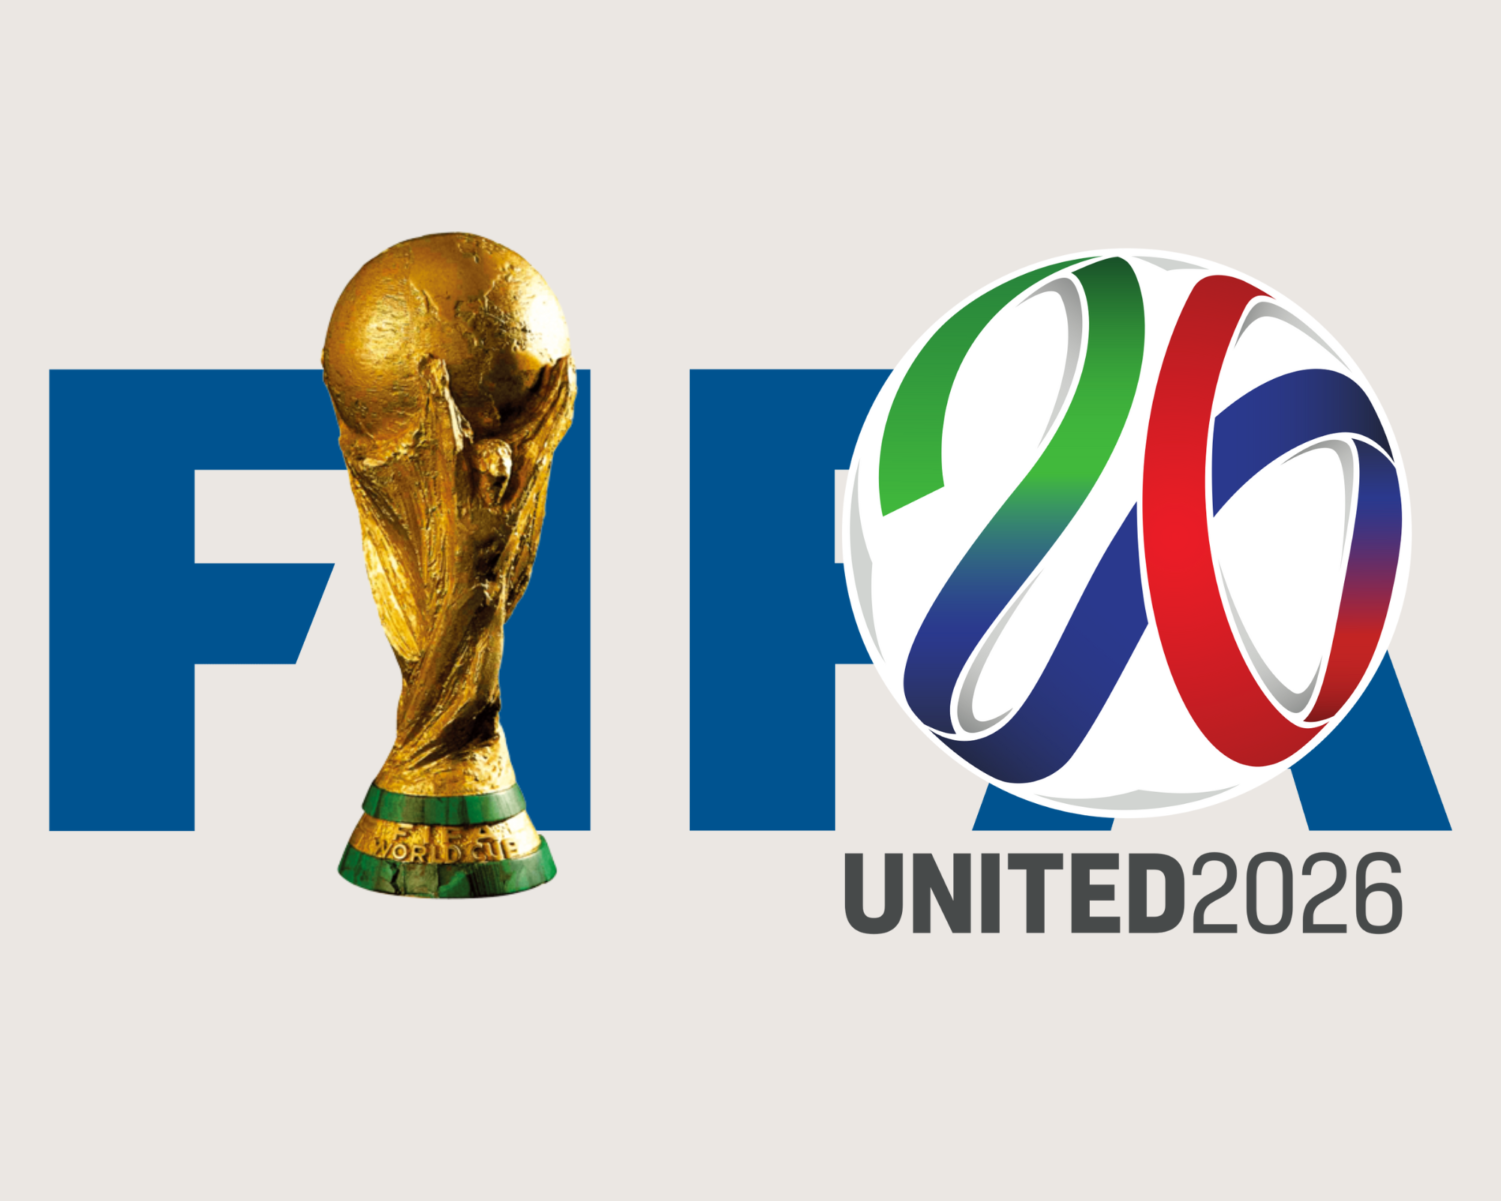 Three hosts, 48 teams: how the 2026 World Cup will work, World Cup 2026